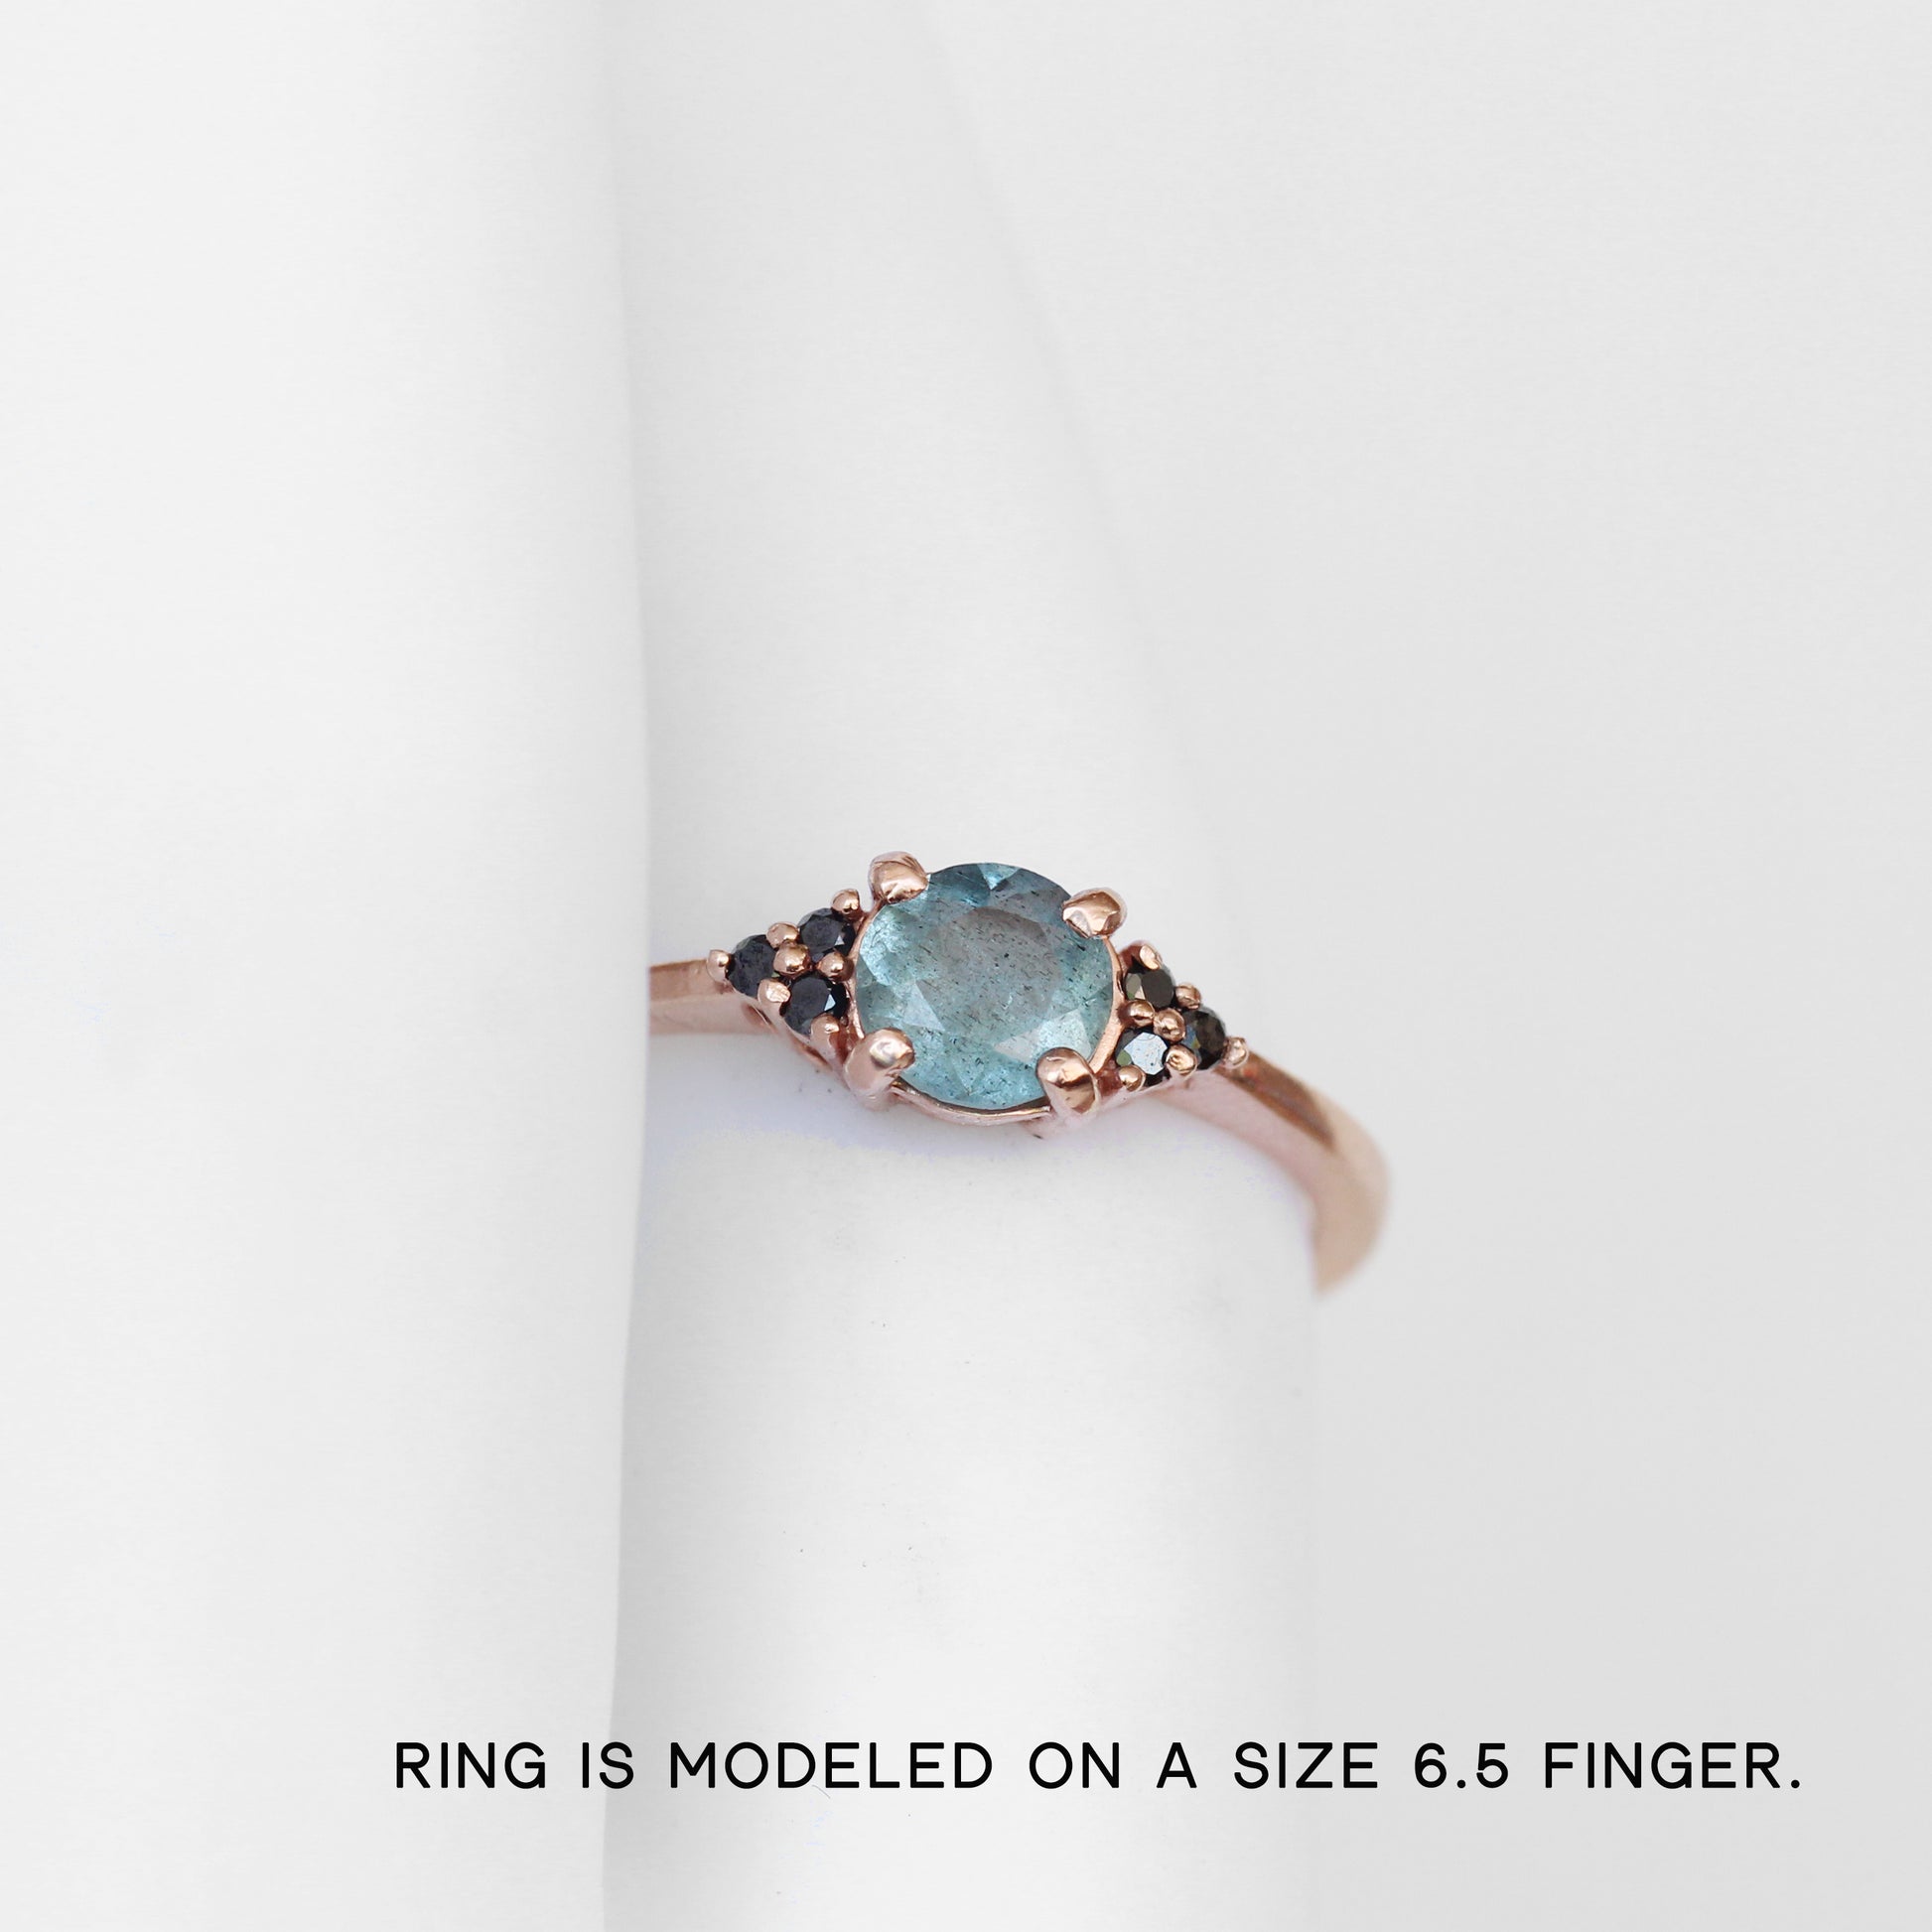 Imogene Ring with a Mossy Aquamarine and Black Diamonds in your choice of gold - Midwinter Co. Alternative Bridal Rings and Modern Fine Jewelry